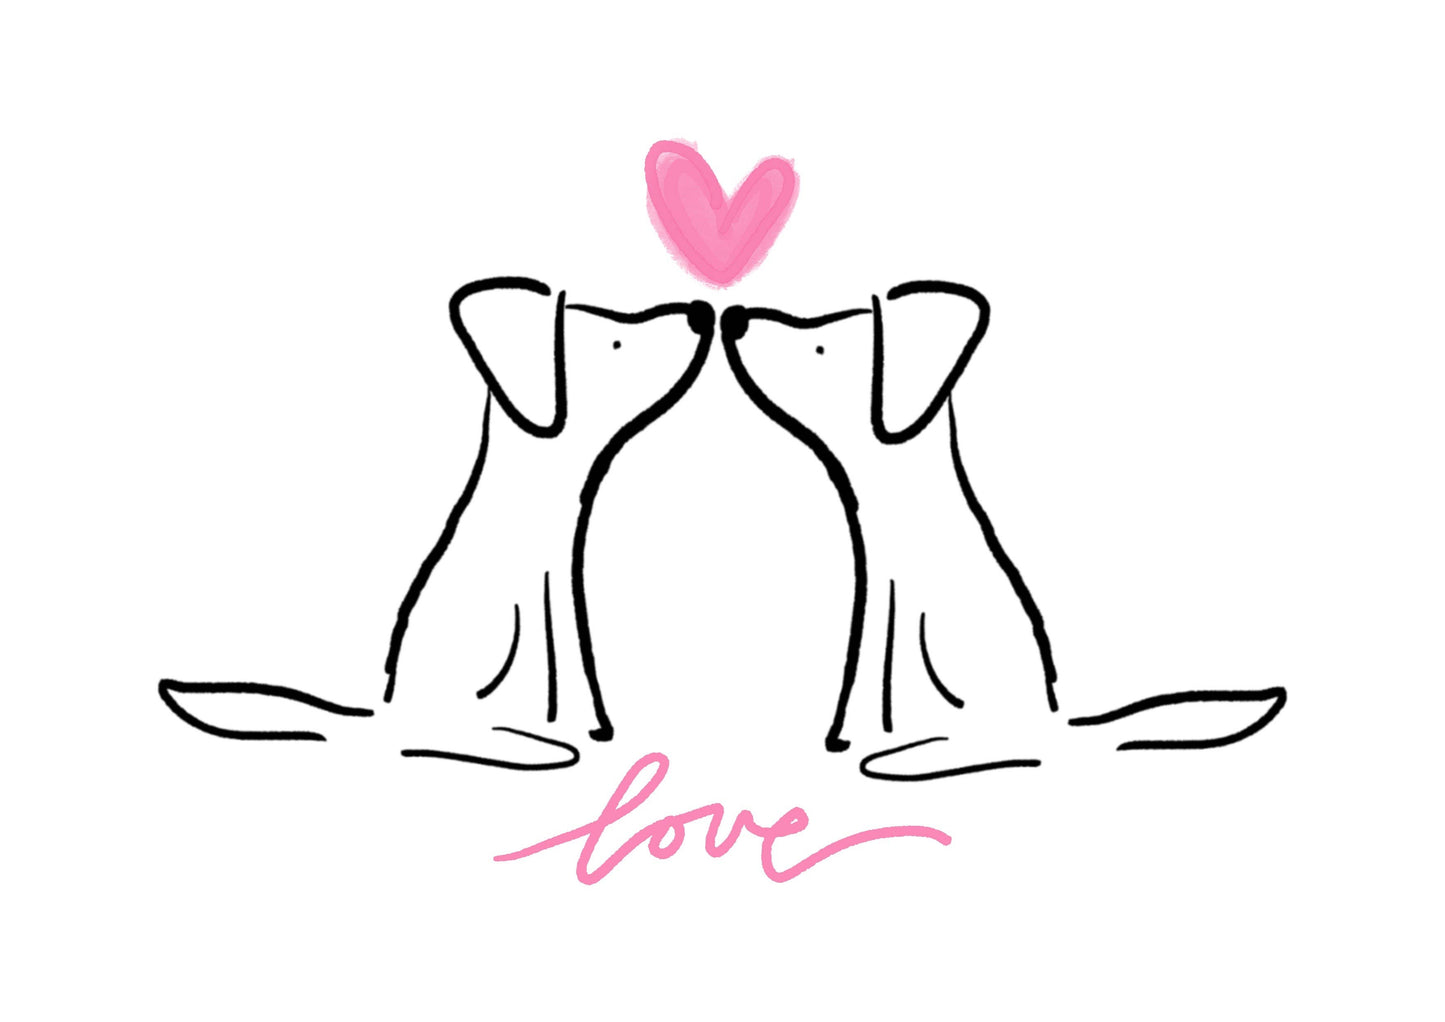 Love Dog Greeting Card by Anna Whitham Co.